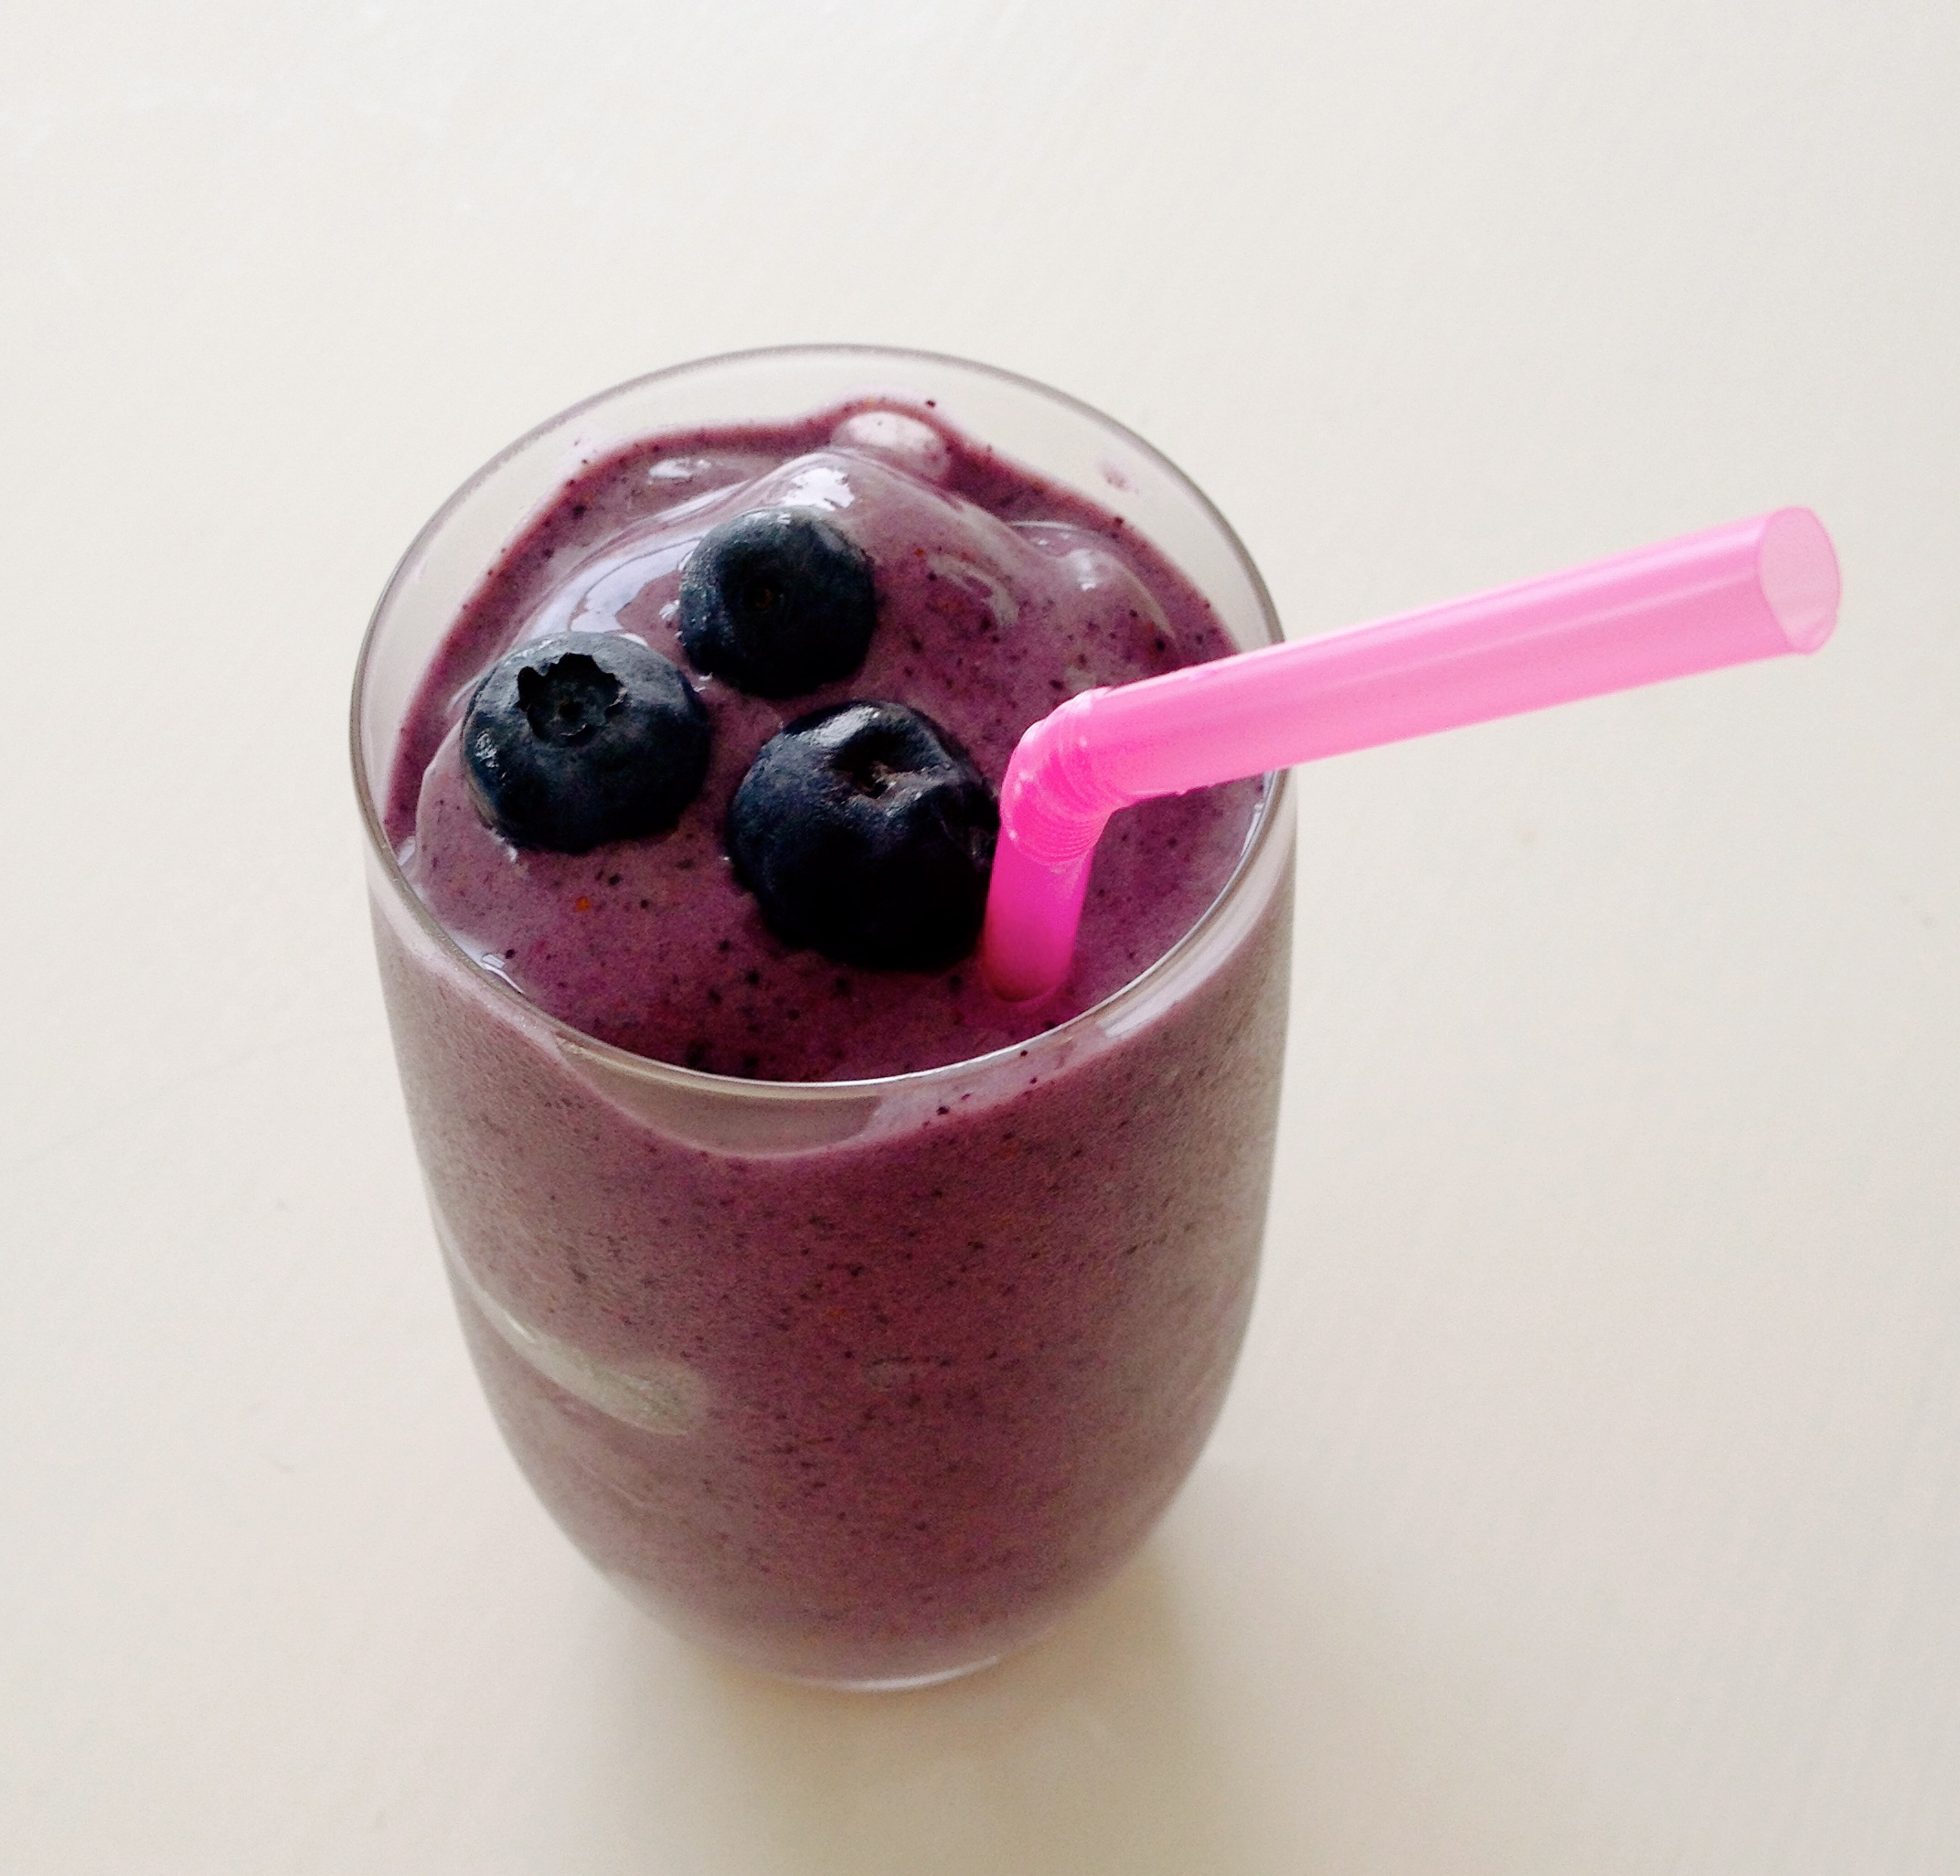 Meatless Monday – Coconut Blueberry Smoothie